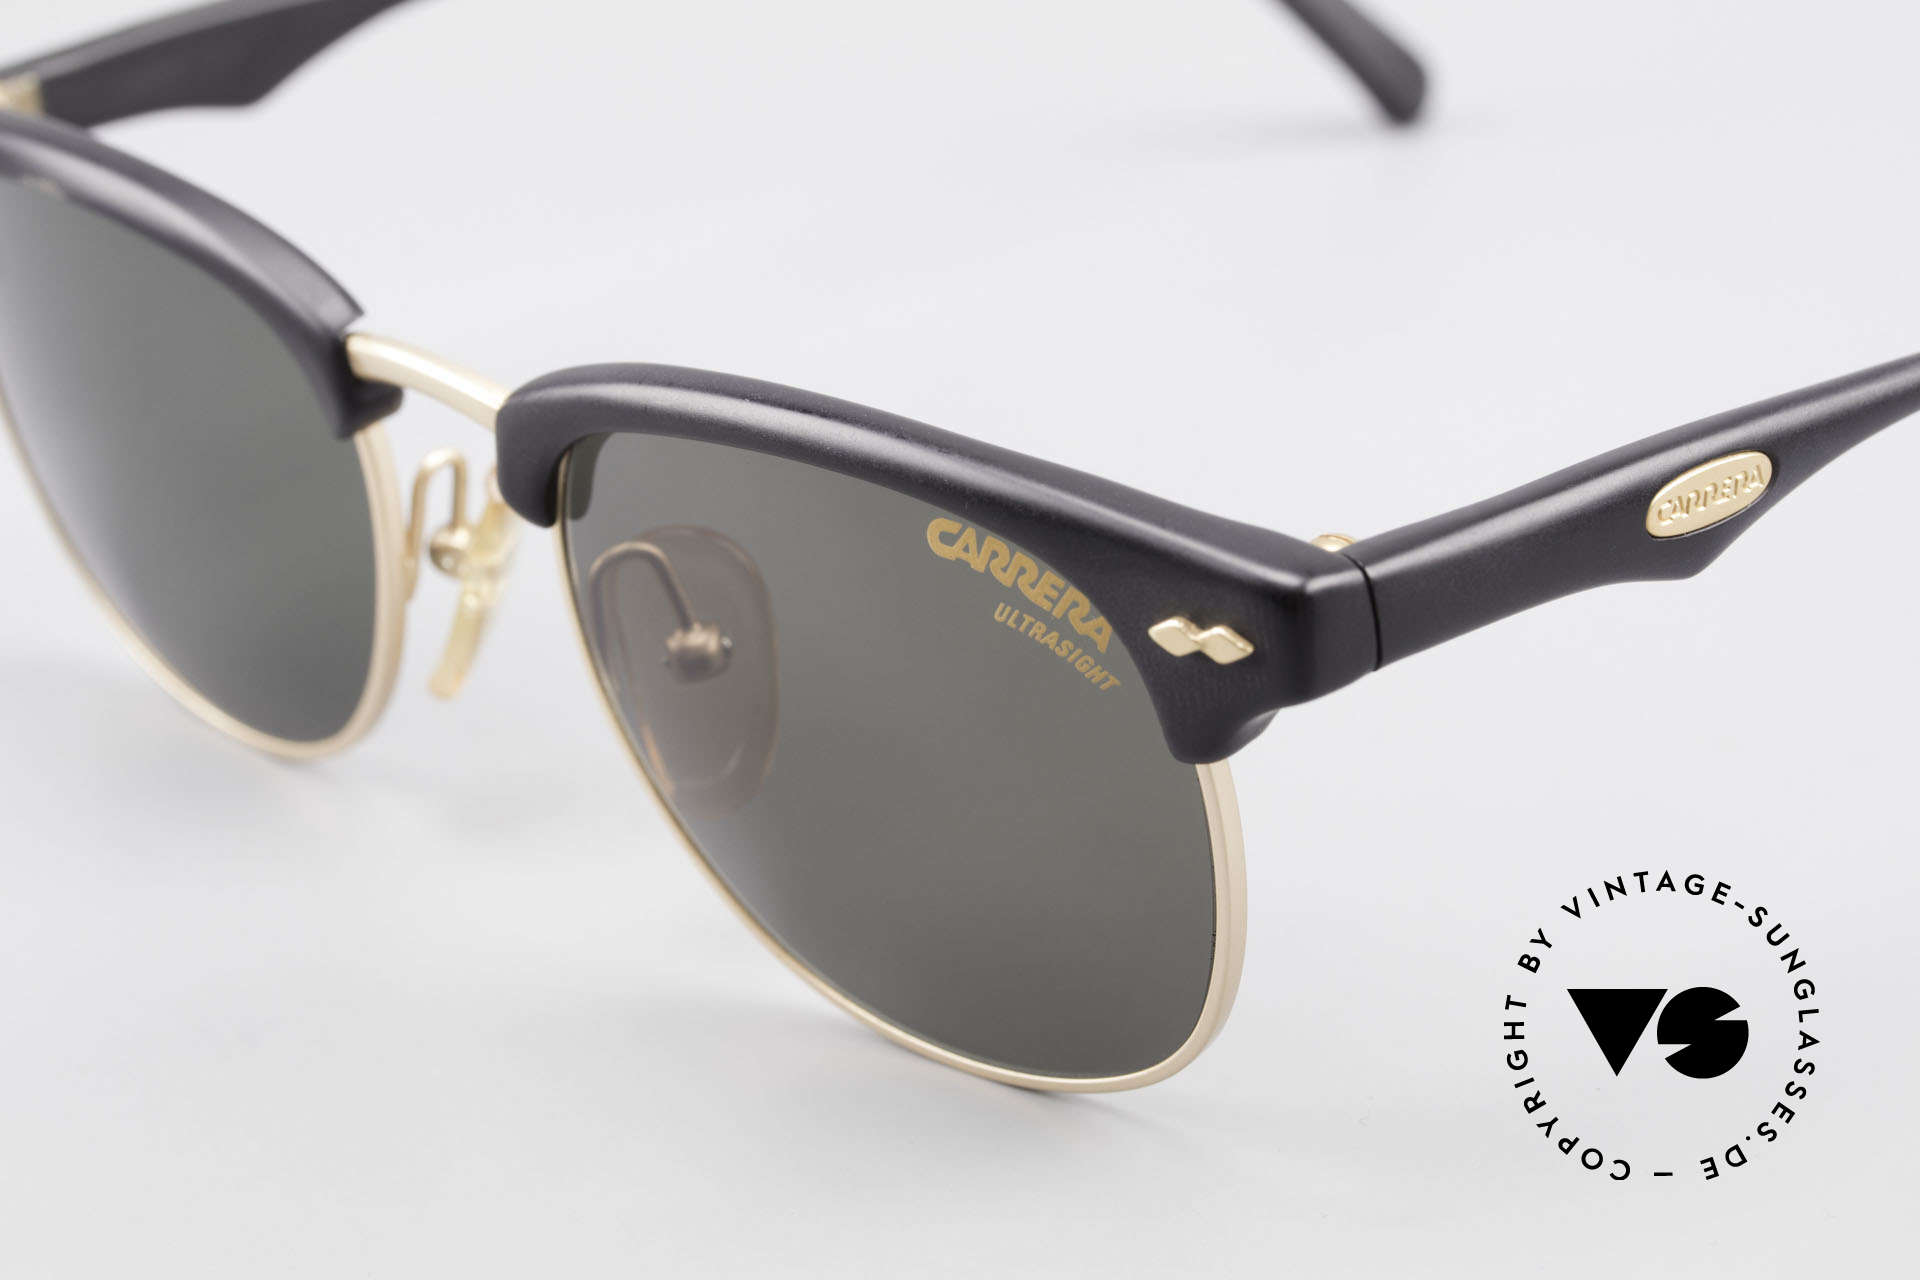 clubmaster sunglasses style